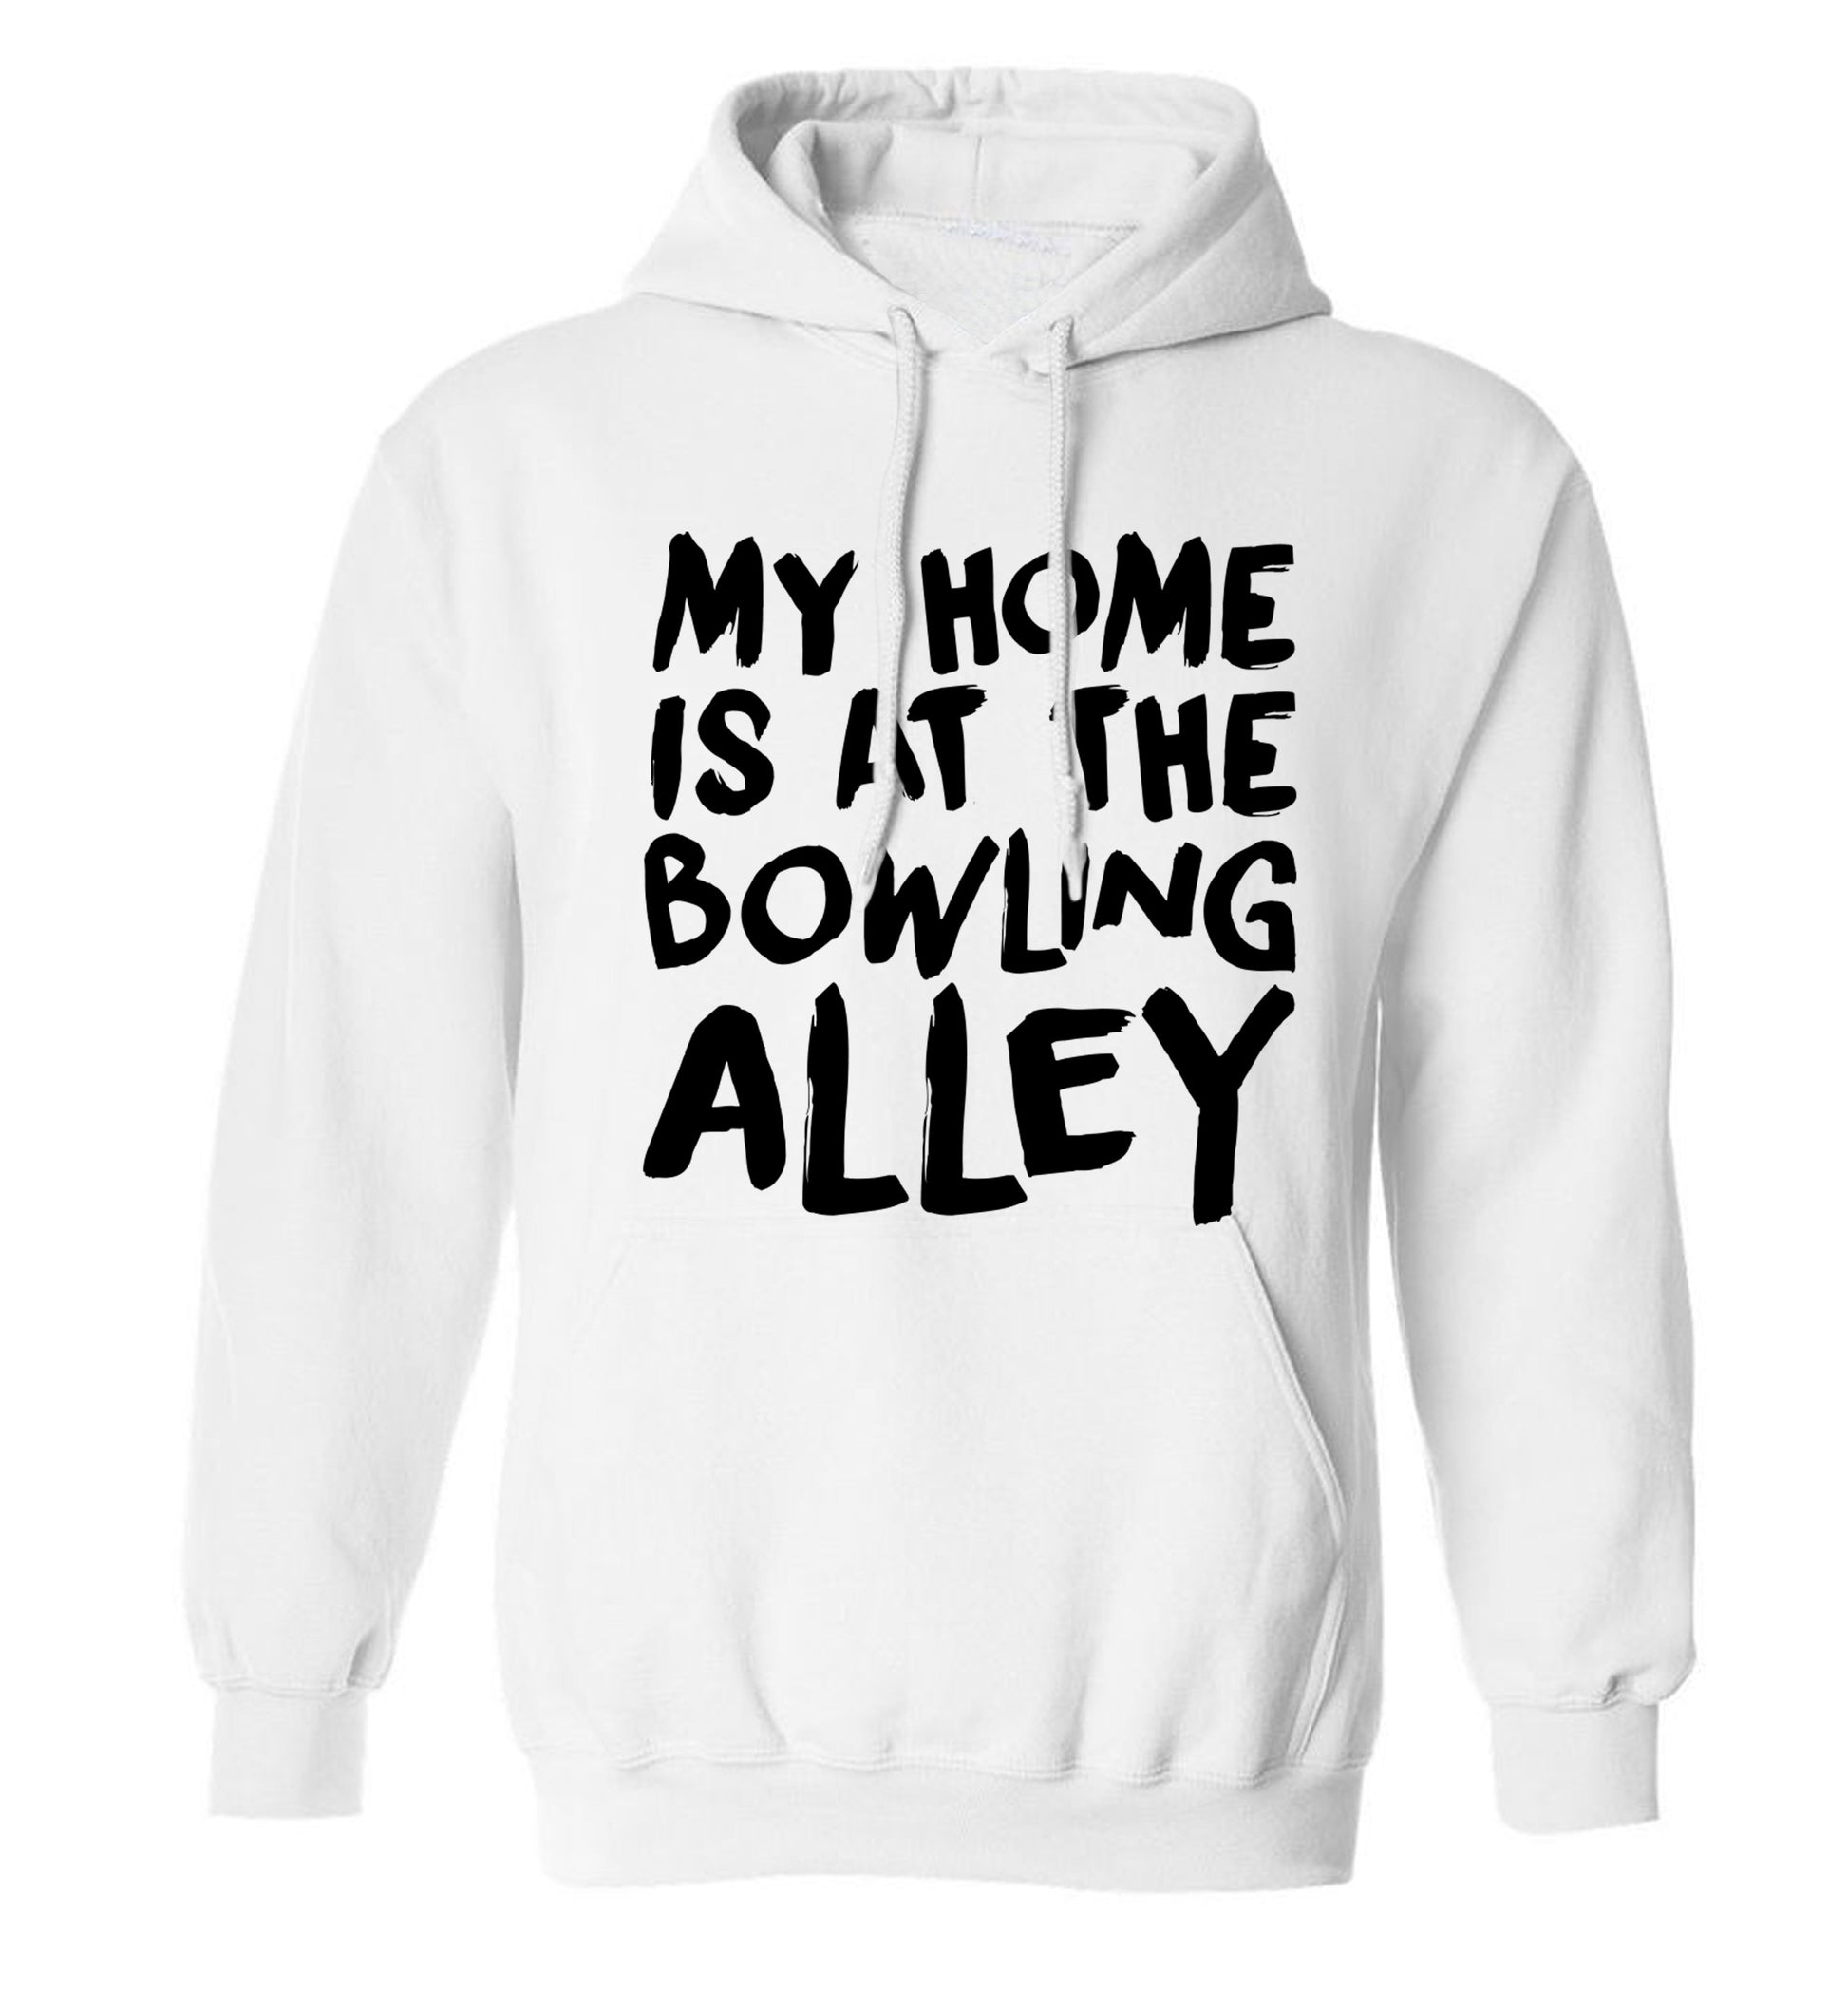 My home is at the bowling alley adults unisex white hoodie 2XL